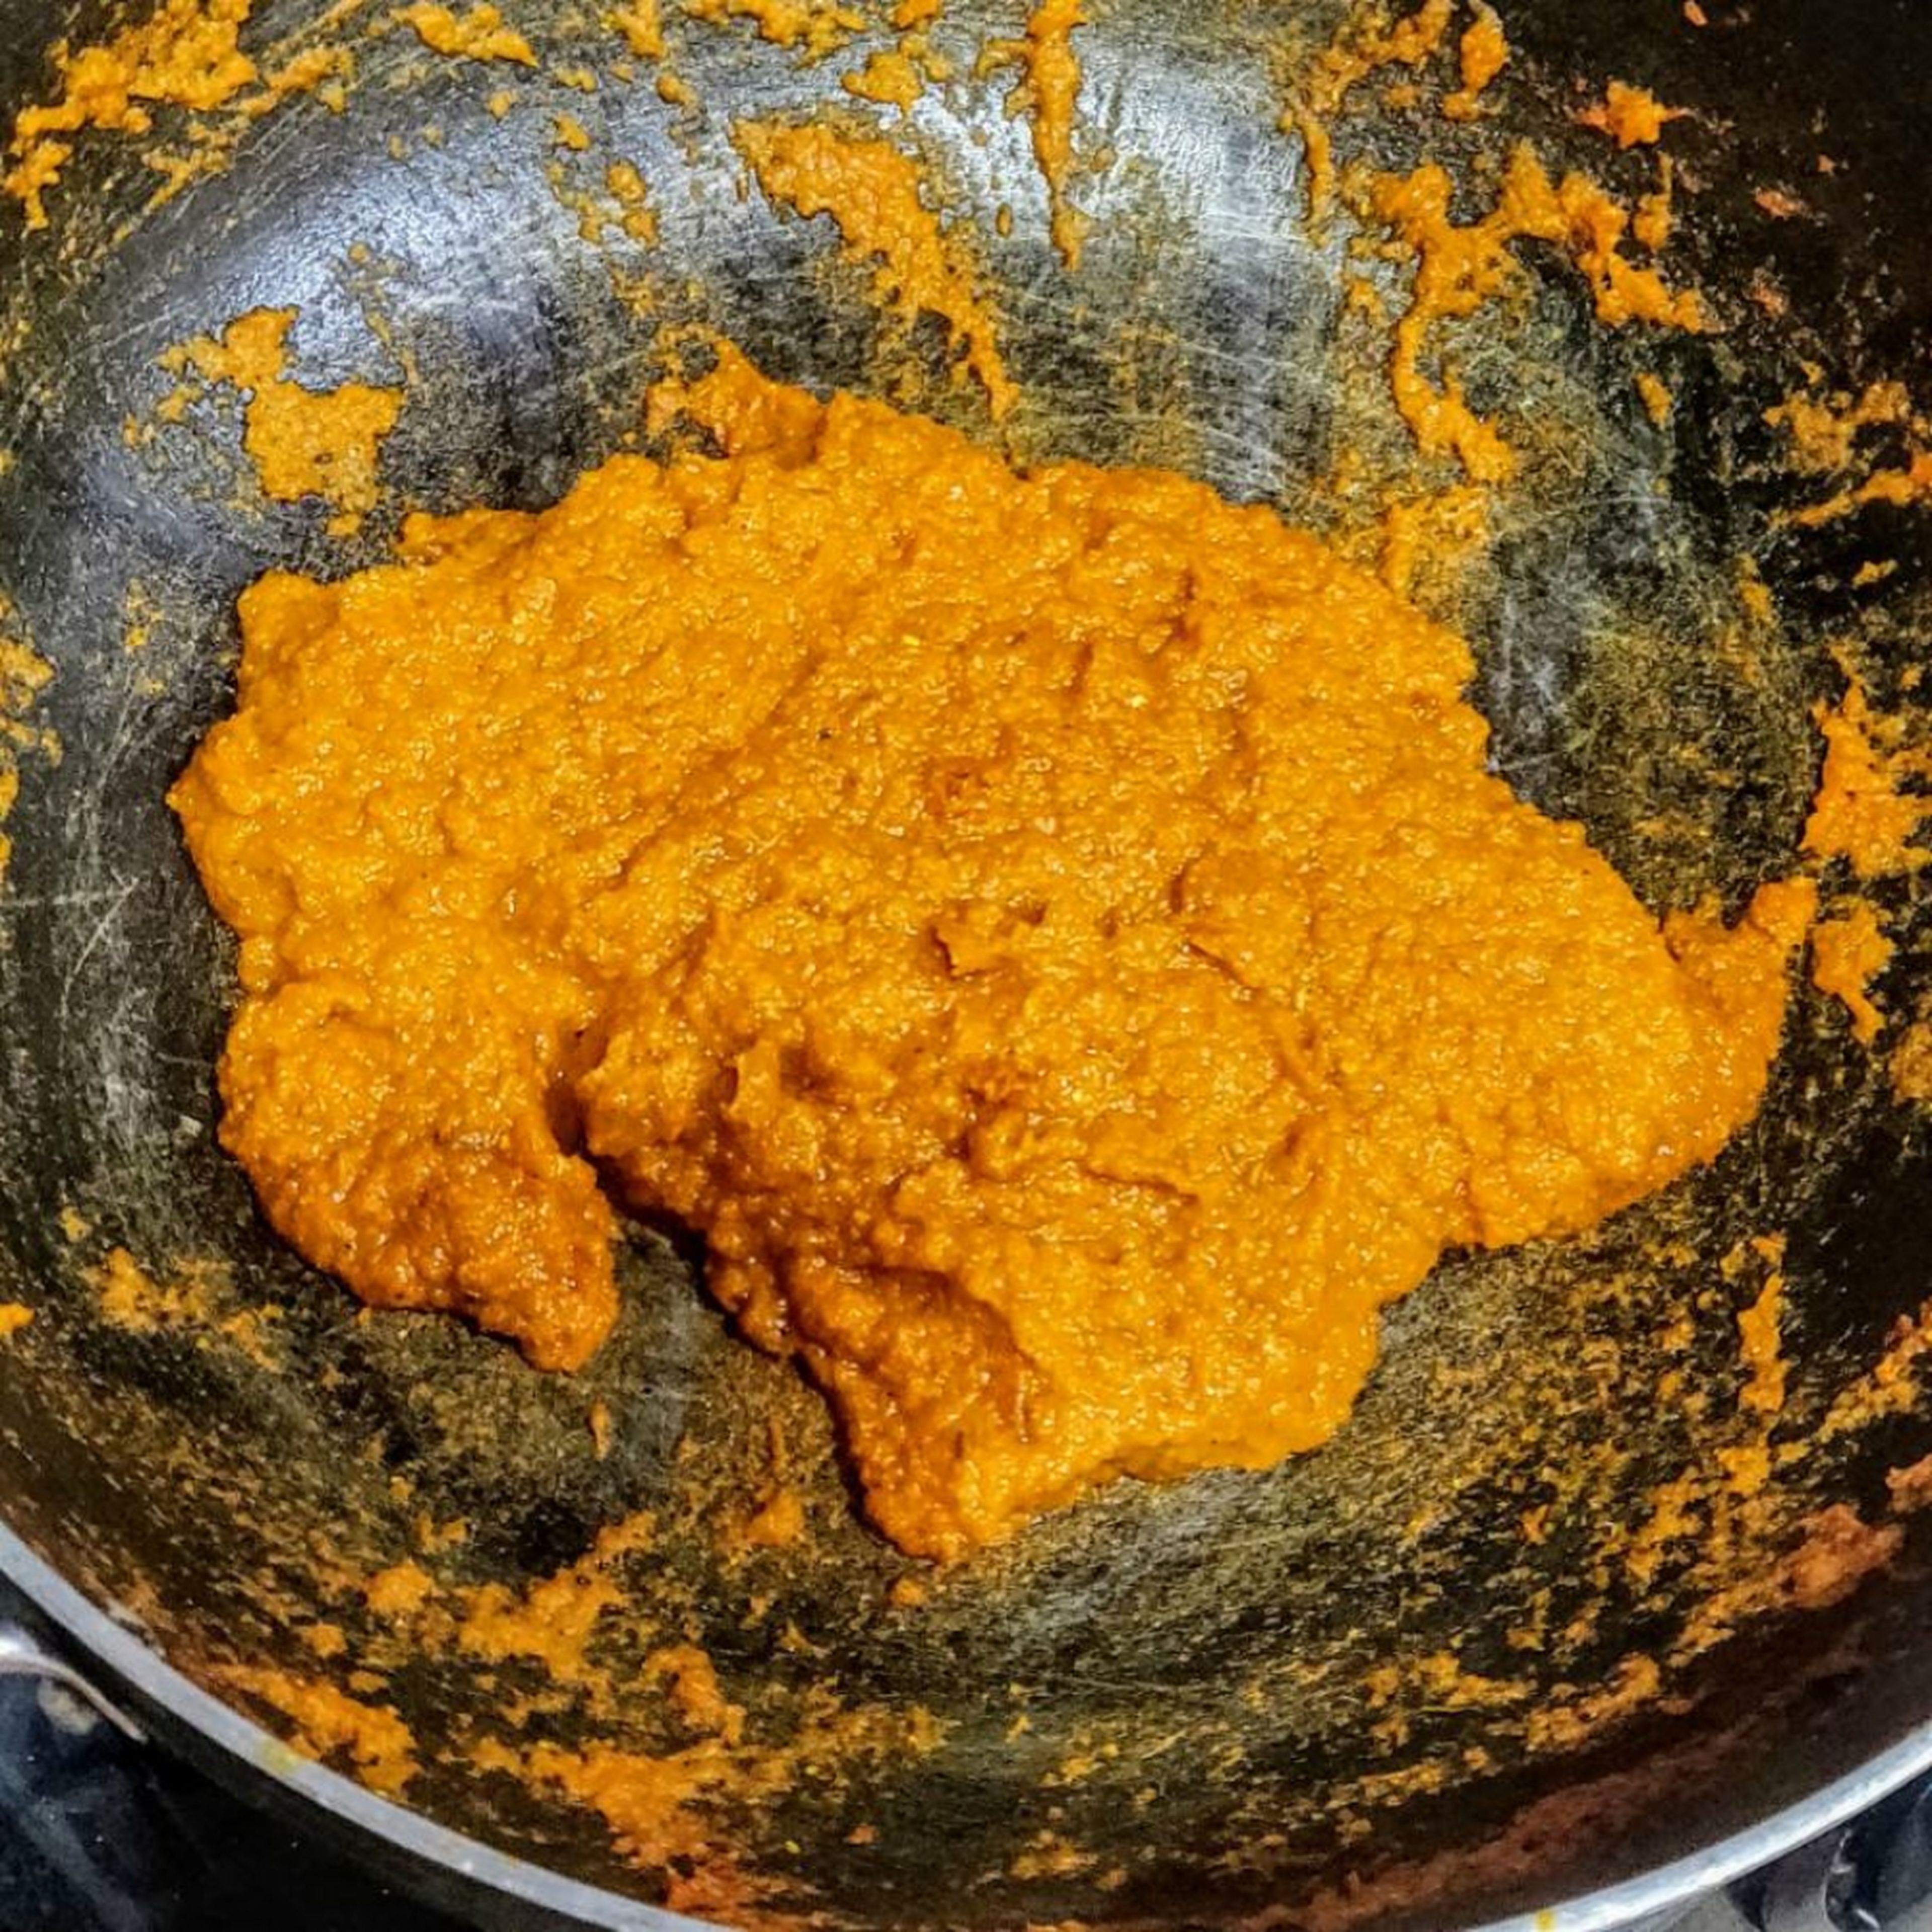 In a wok. Heat oil add 1 TSP red chilli powder. Add the onion tomato paste. Cook it till the oil separates. The paste should look dark red brownish colour. Add 2 tsp coriander powder, 1/2 tsp tumeric powder, 1/2 tsp black pepper powder. This process should take at least 15 min.